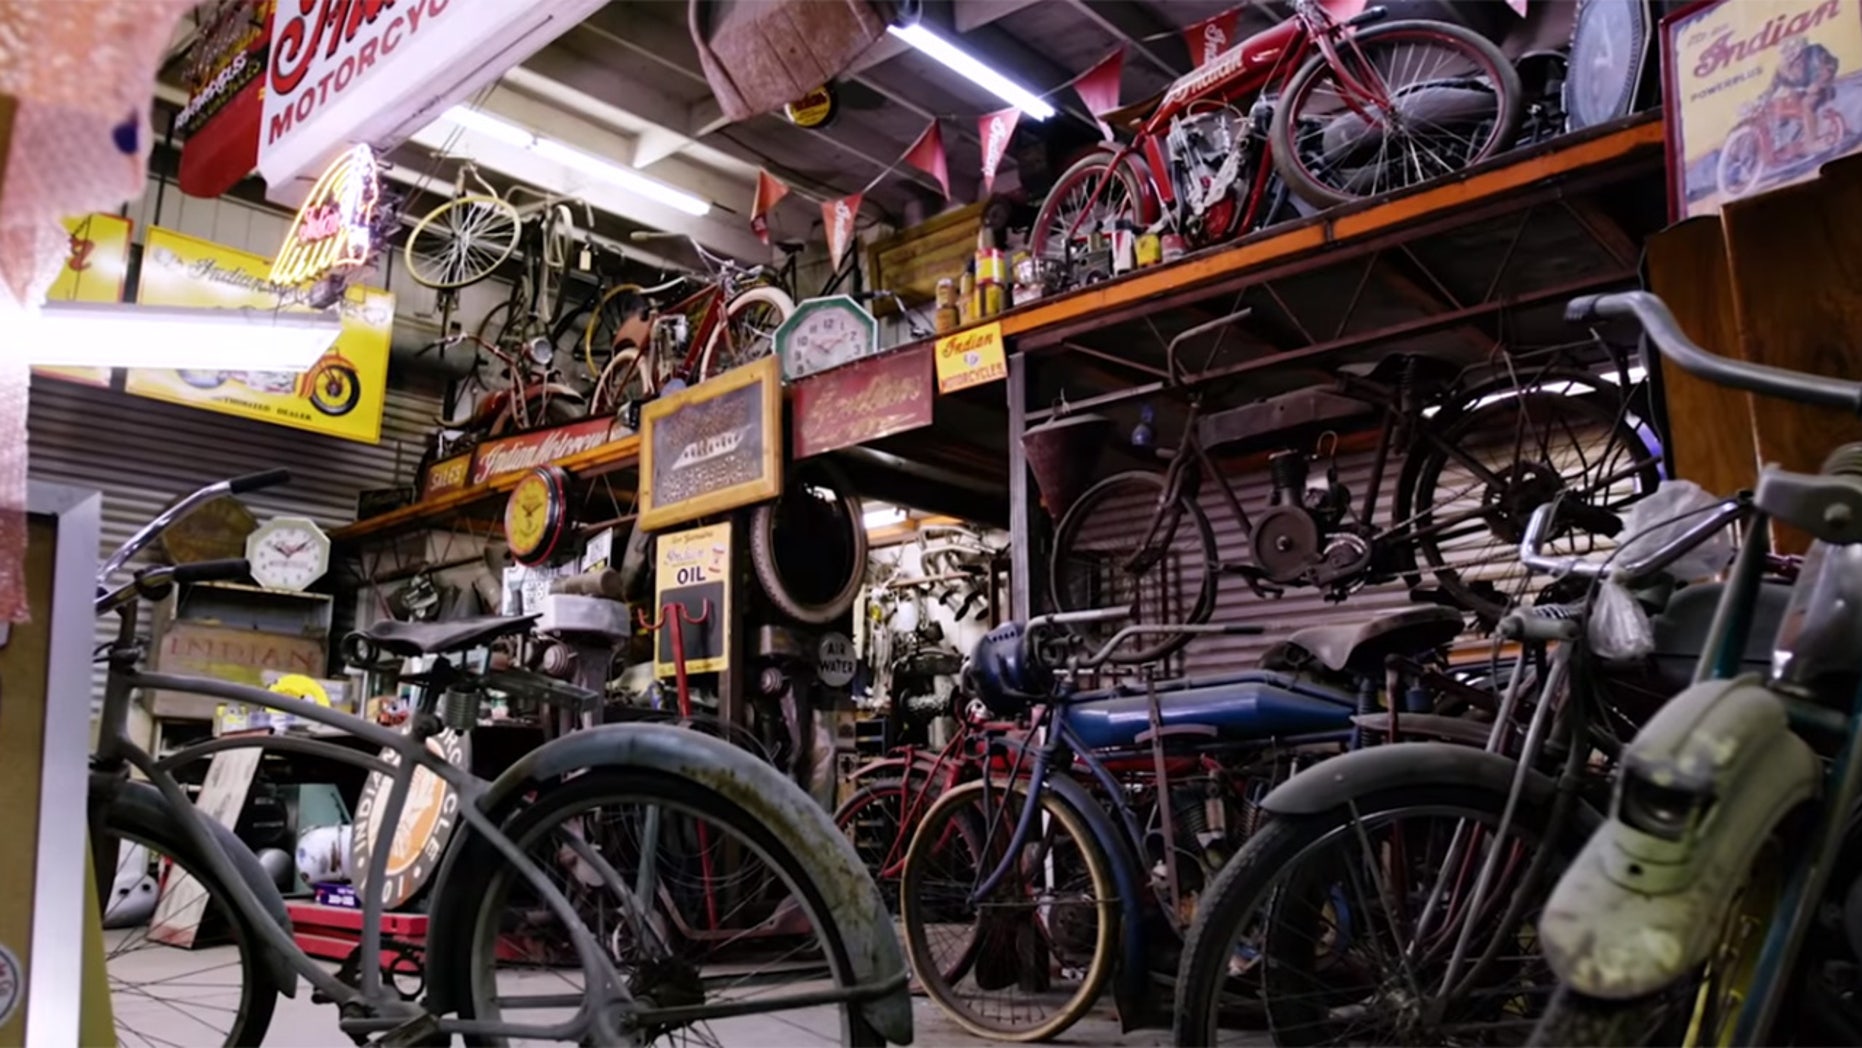 Treasure trove of Indian motorcycles found in scrapyard sold for small fortune